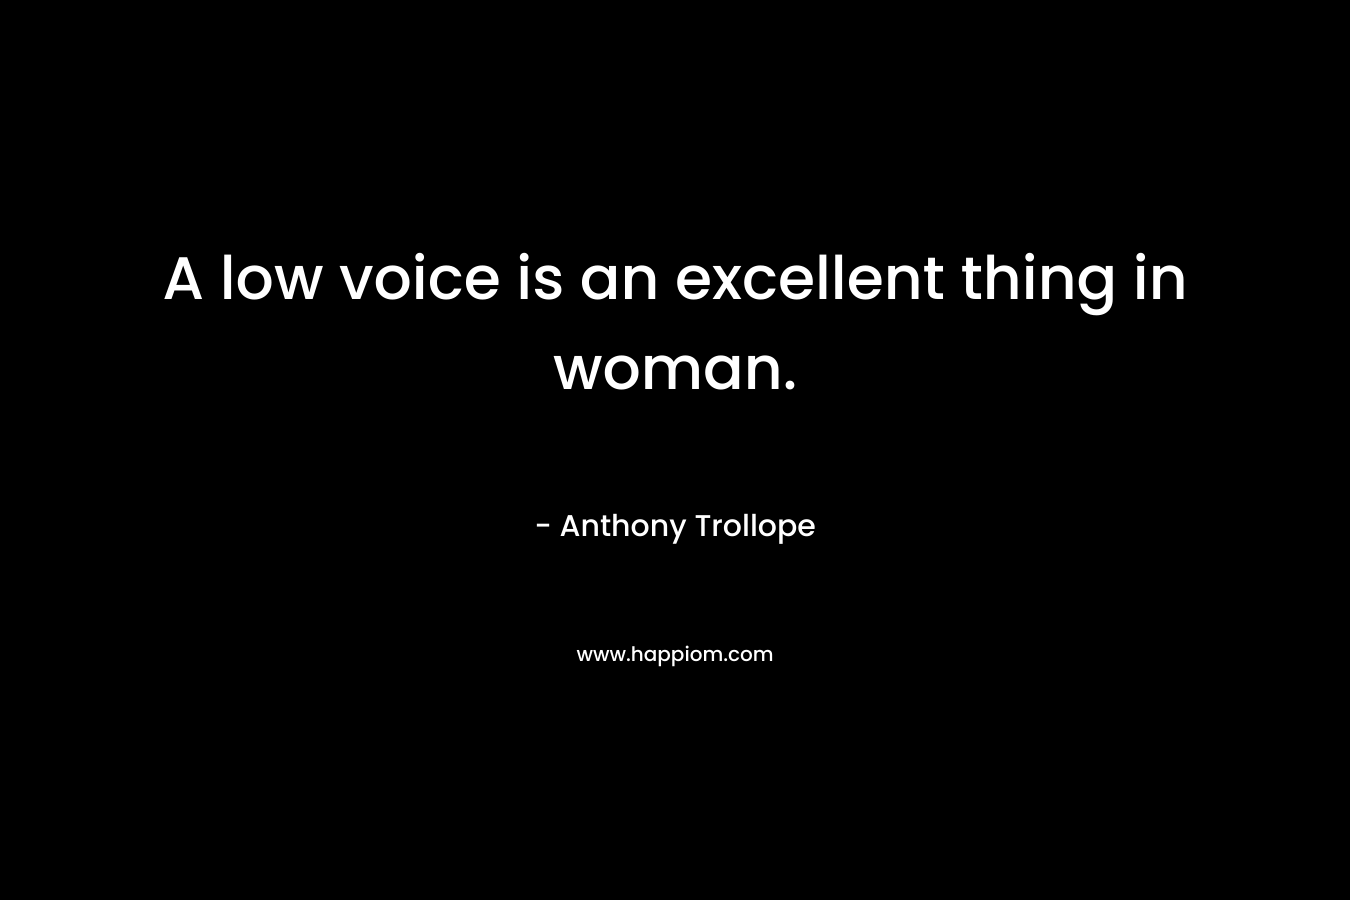 A low voice is an excellent thing in woman. – Anthony Trollope